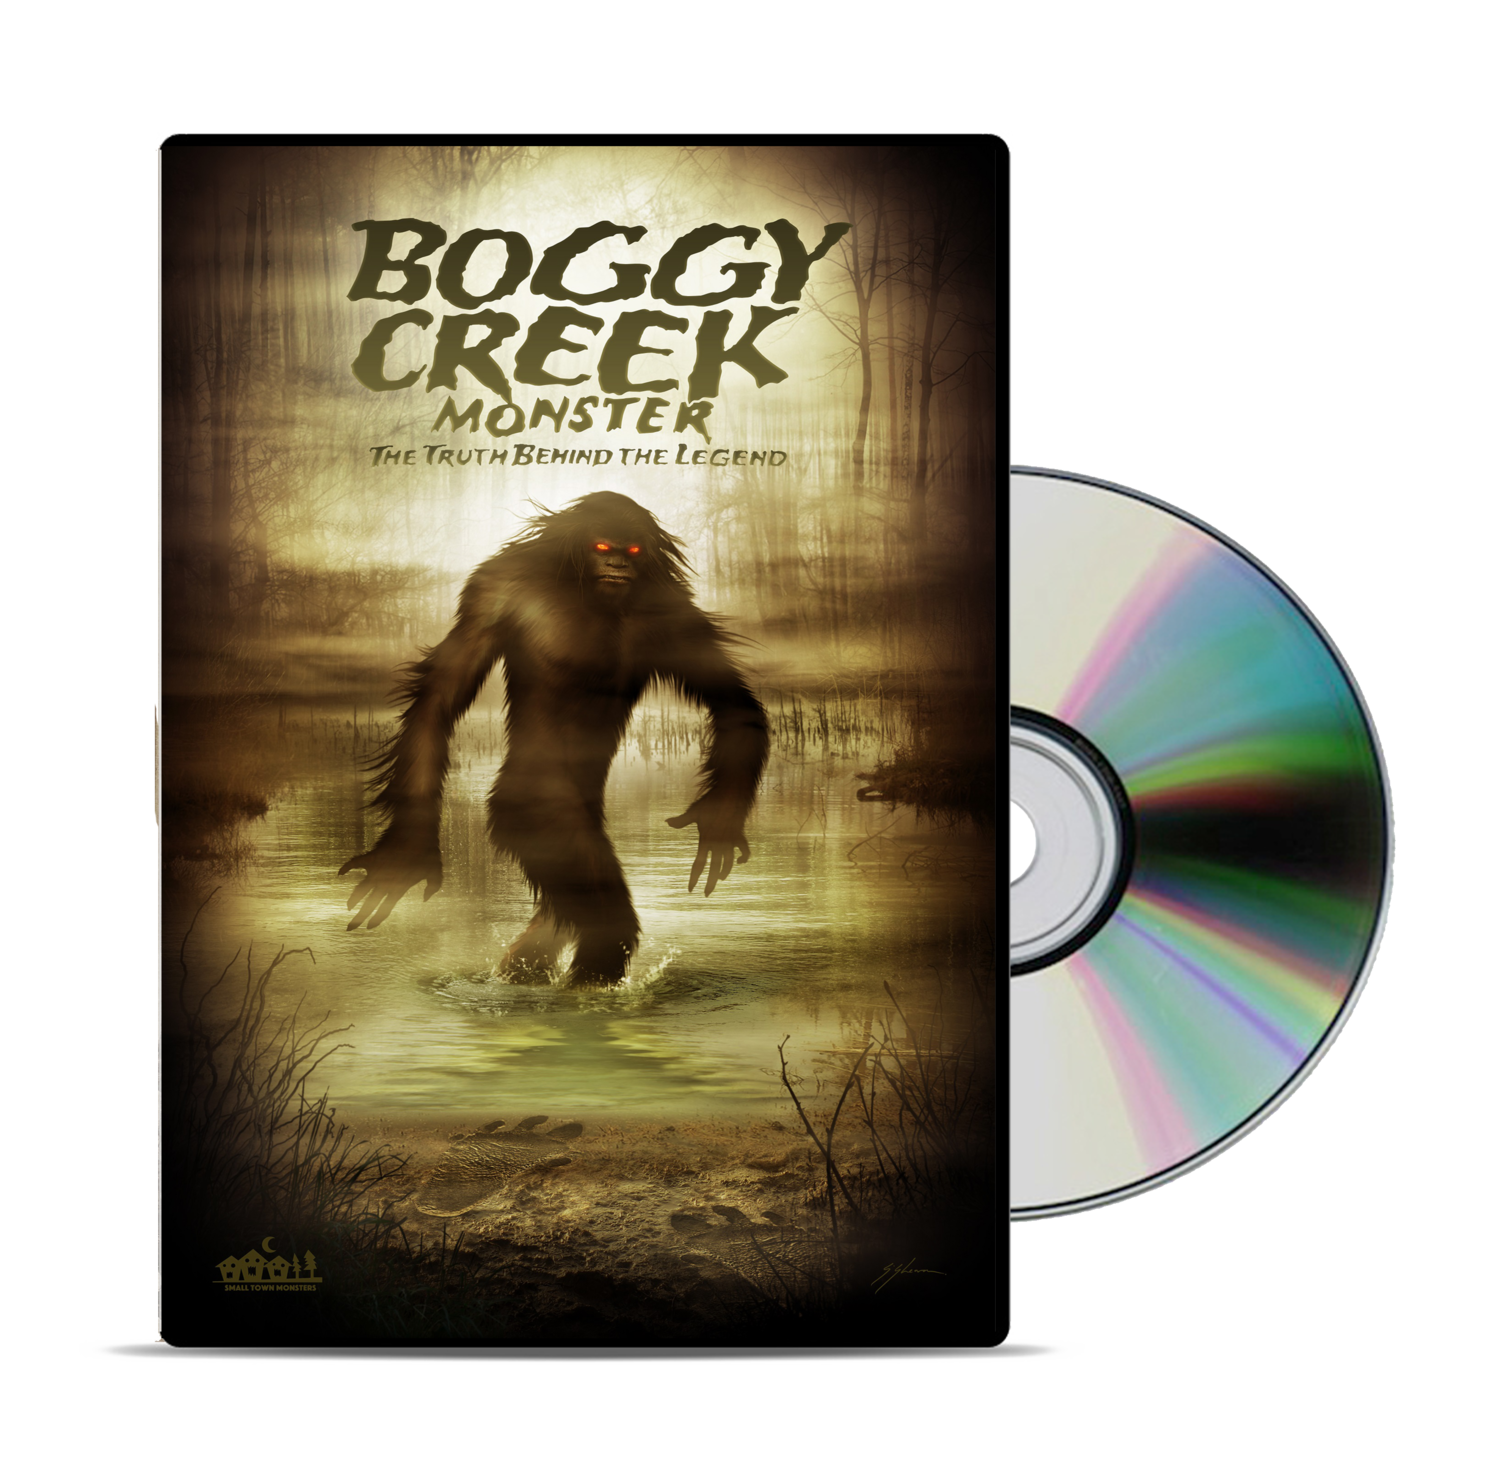 Boggy Creek Monster: The Truth Behind the Legend DVD — Small